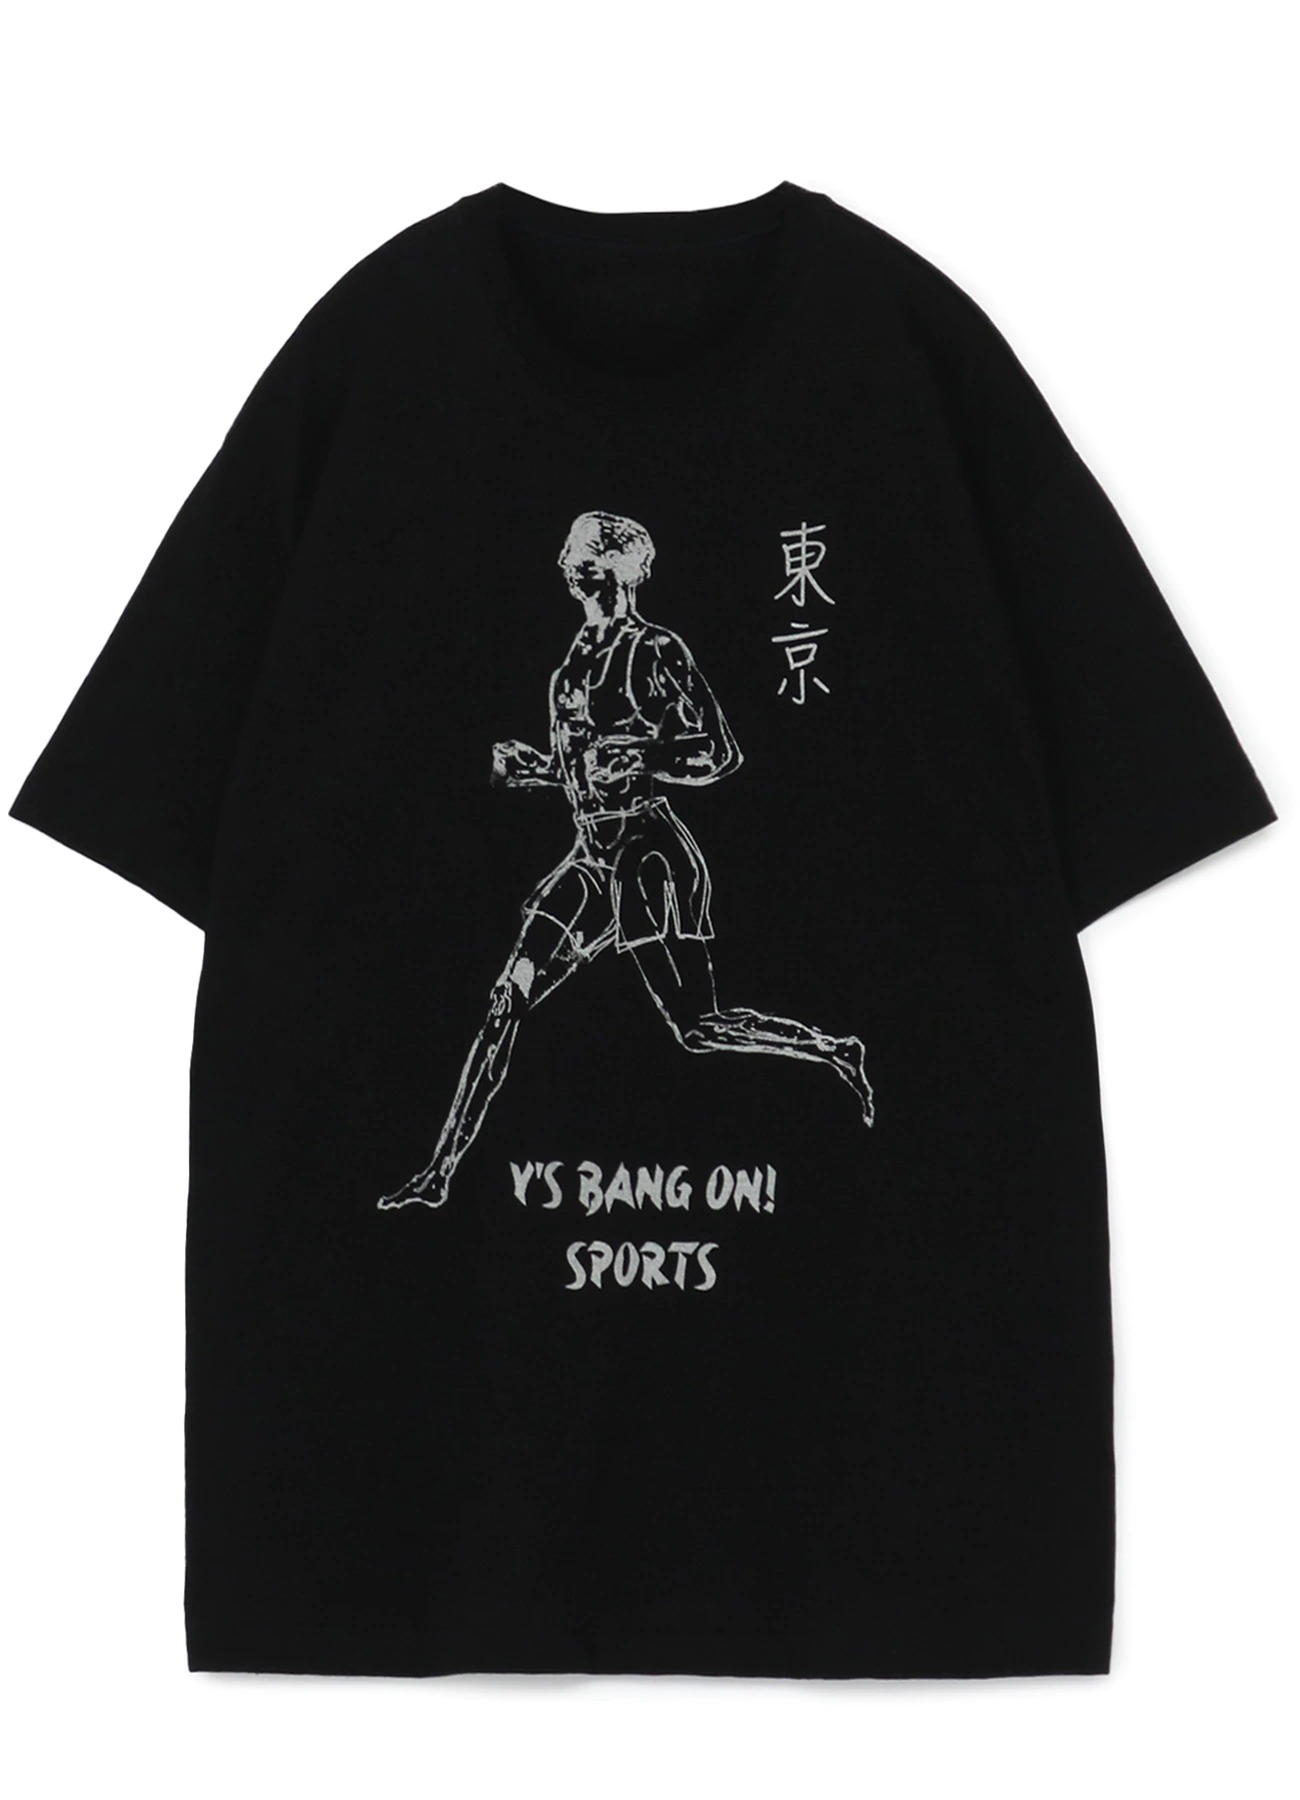 Y's BANG ON!TOKYO Y's BANG ON!SPORTS T-shirts YK-T83-052-1-02